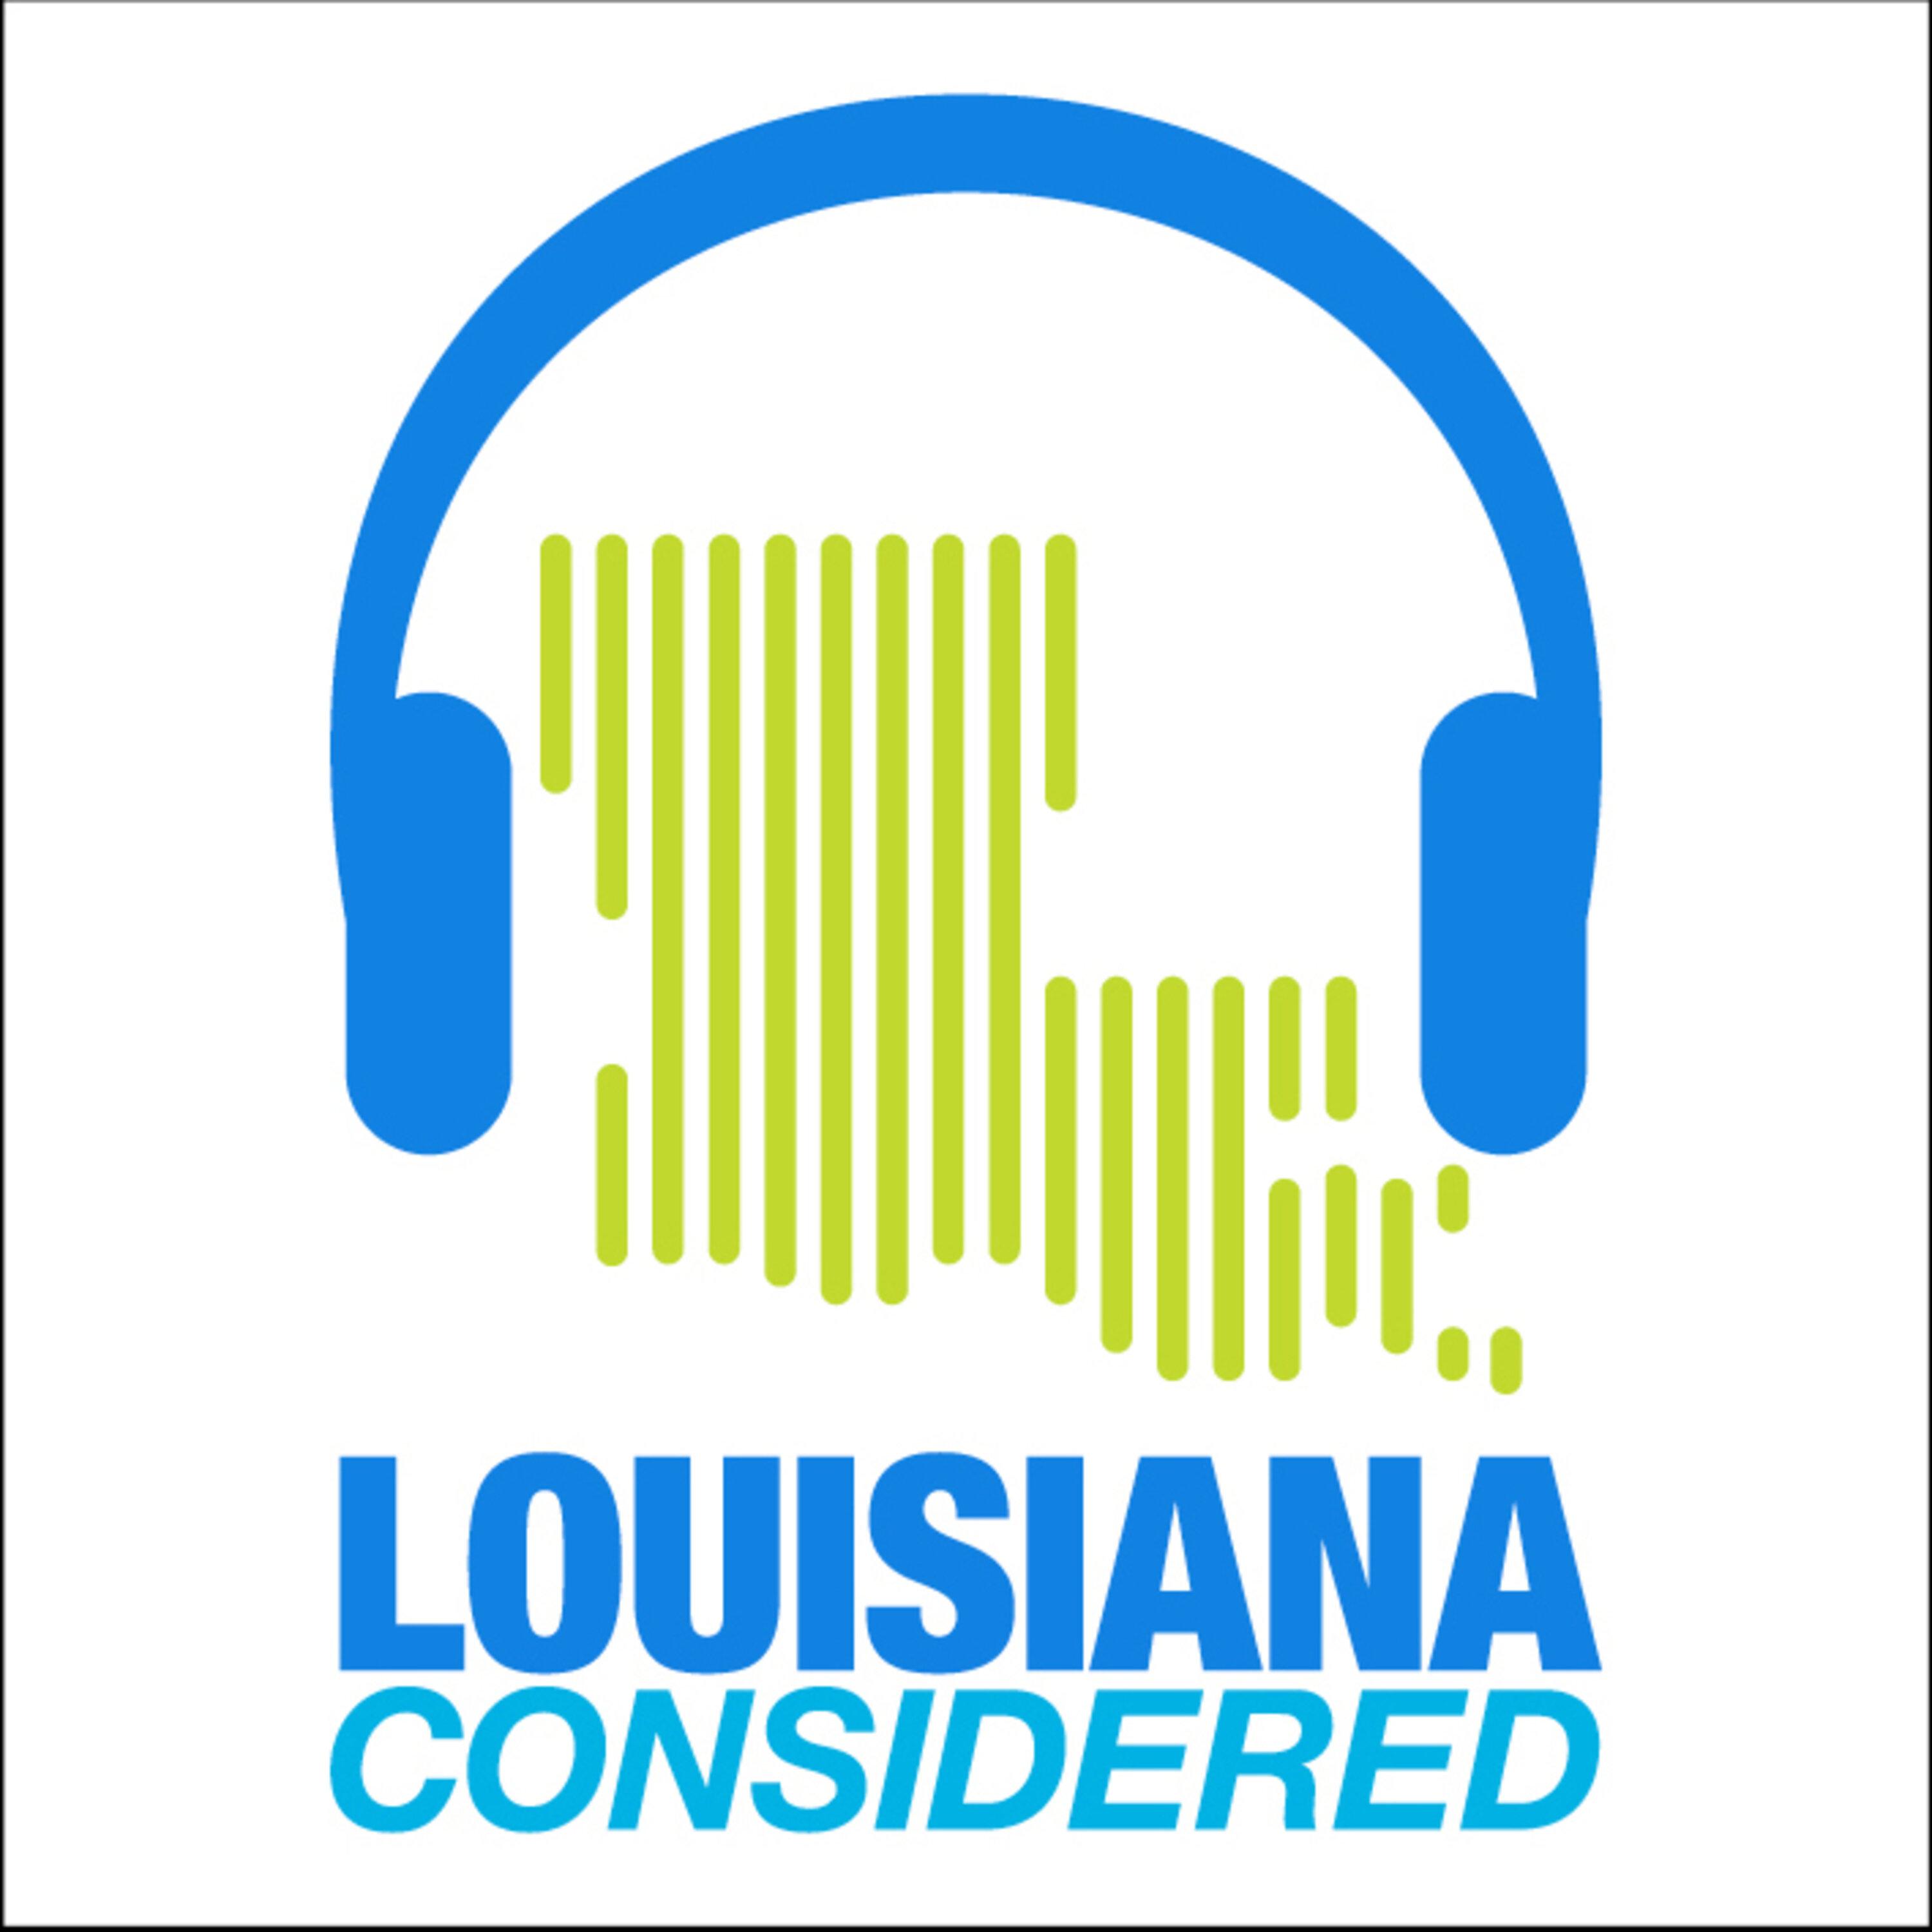 Thumbnail for "Louisiana Considered: Live From The Veto Override Session, NOLABA’s New CEO, What’s With This Weather?".